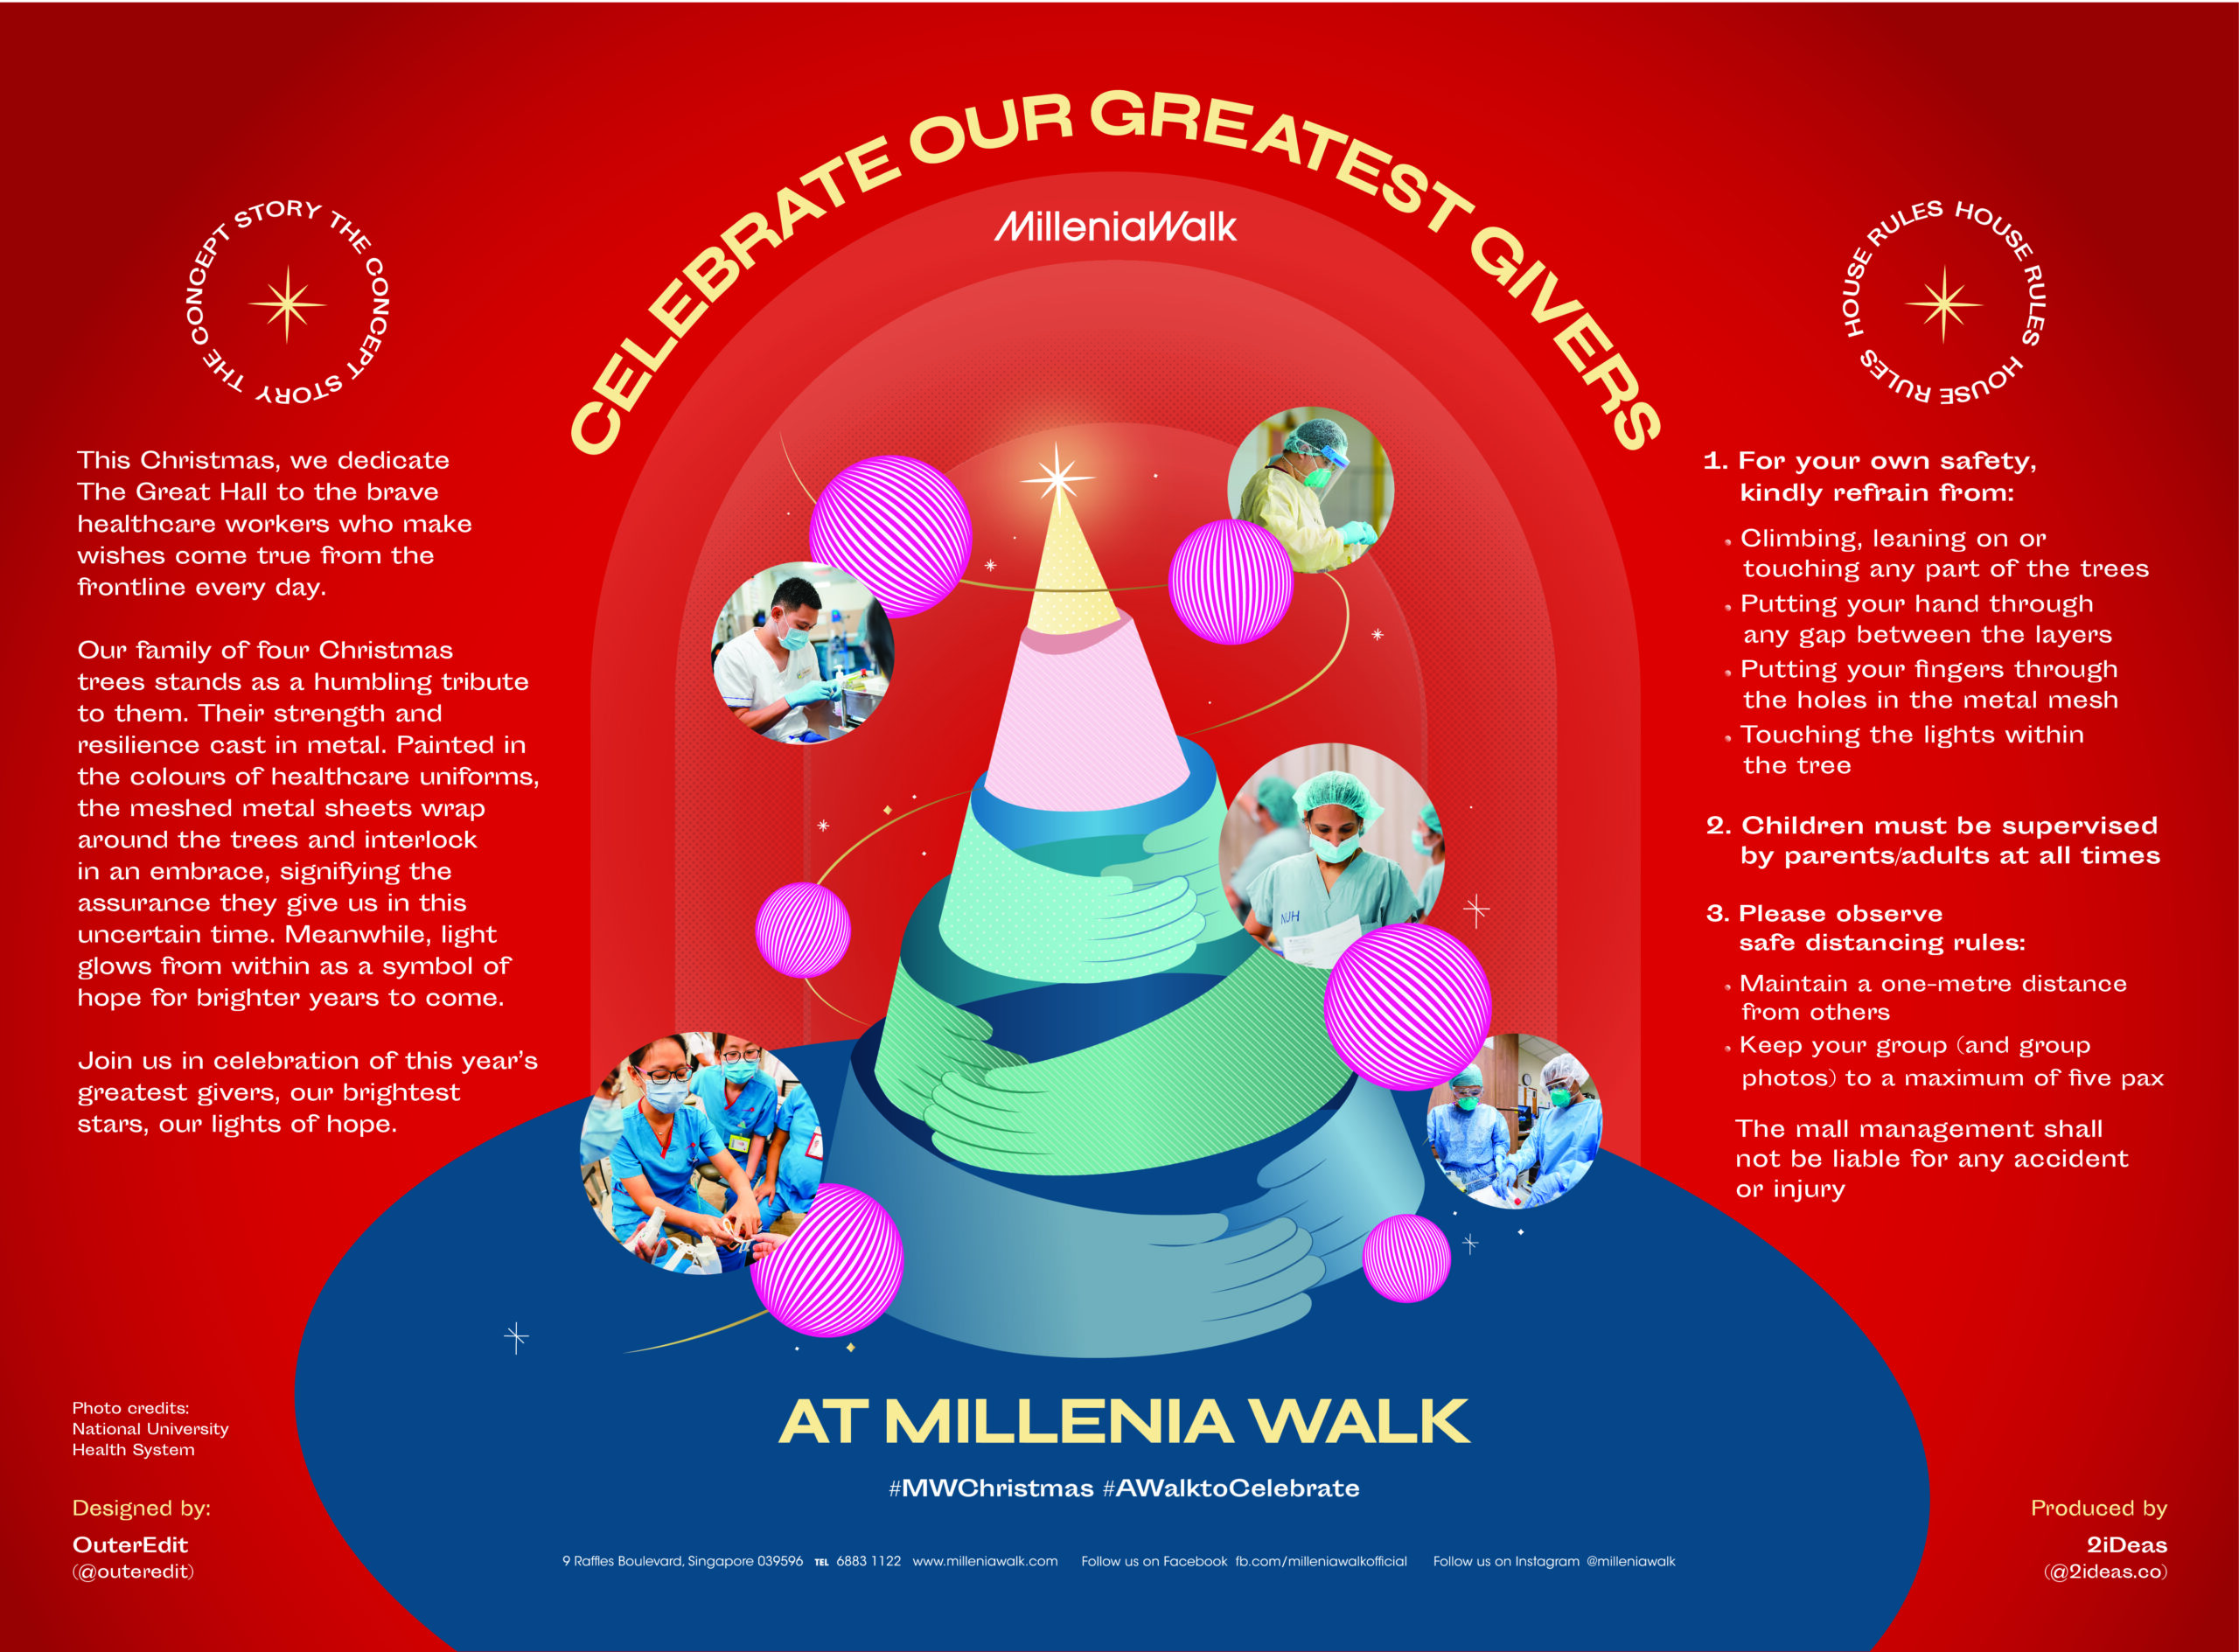 Millenia-Walk_Celebrate-Our-Greatest-Givers_KV